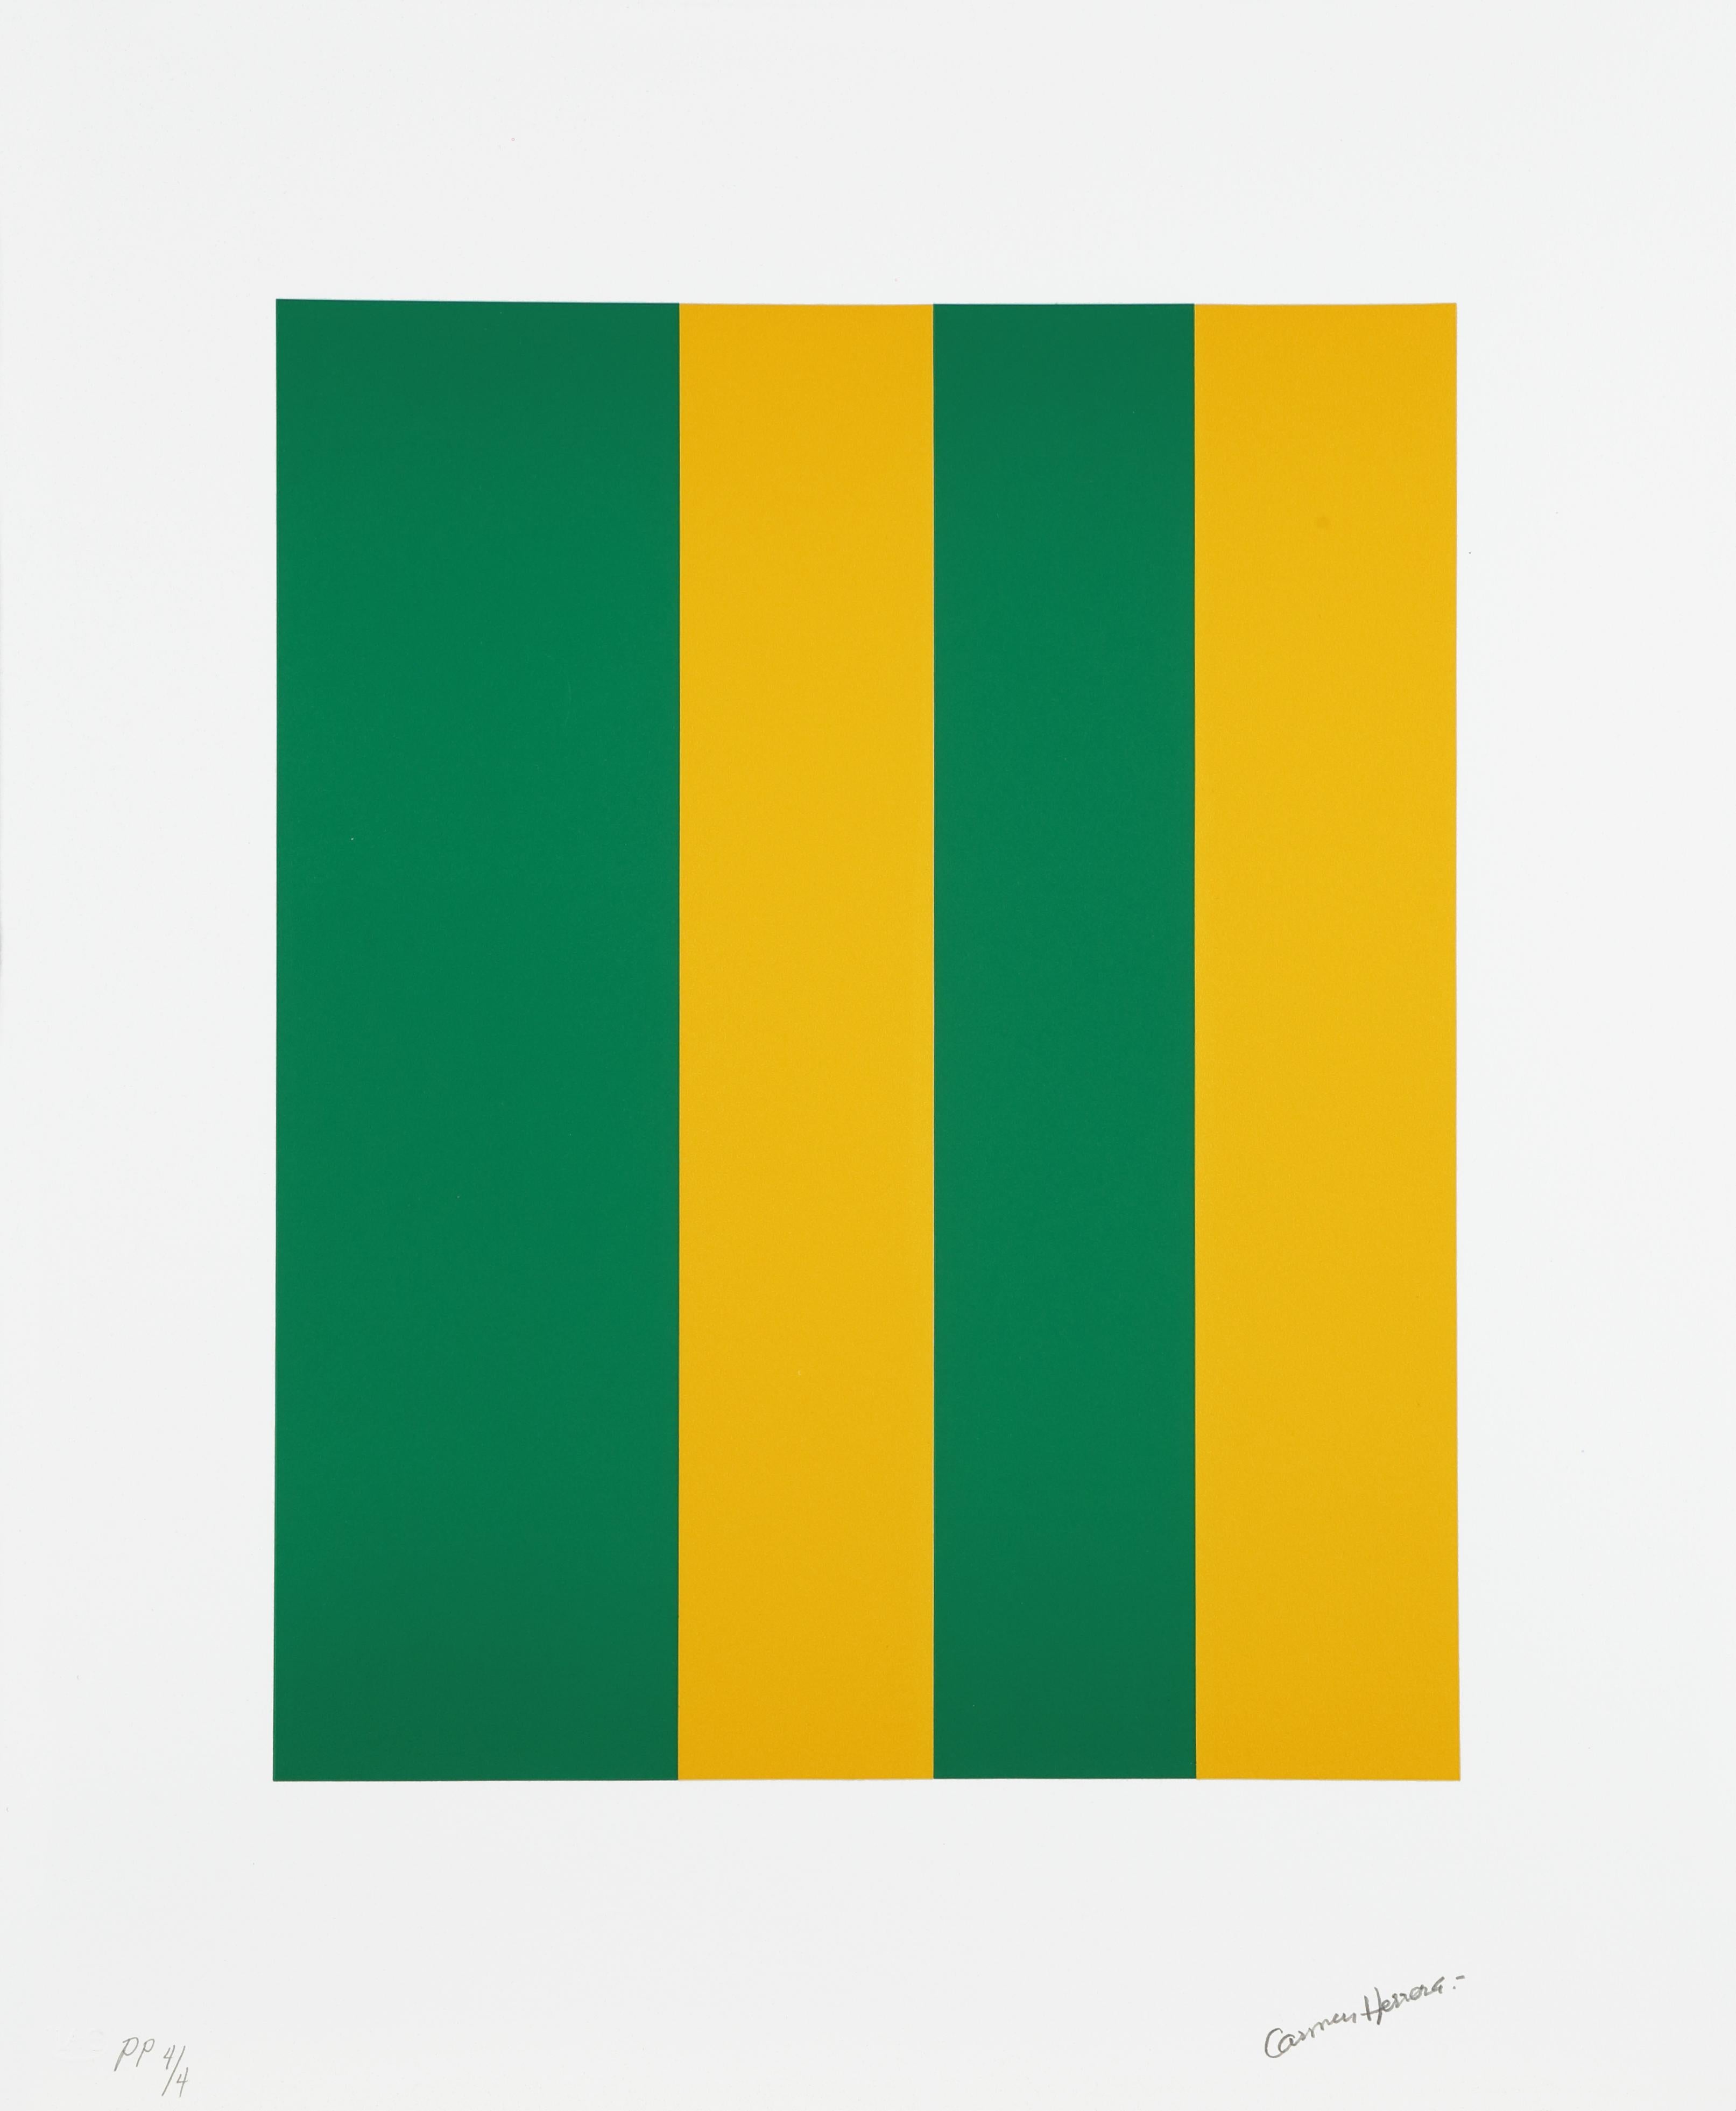 Carmen Herrera Abstract Print - Verde y Amarillo (Green and Yellow). Folder of 3 lithographs. Edition 4 of 4